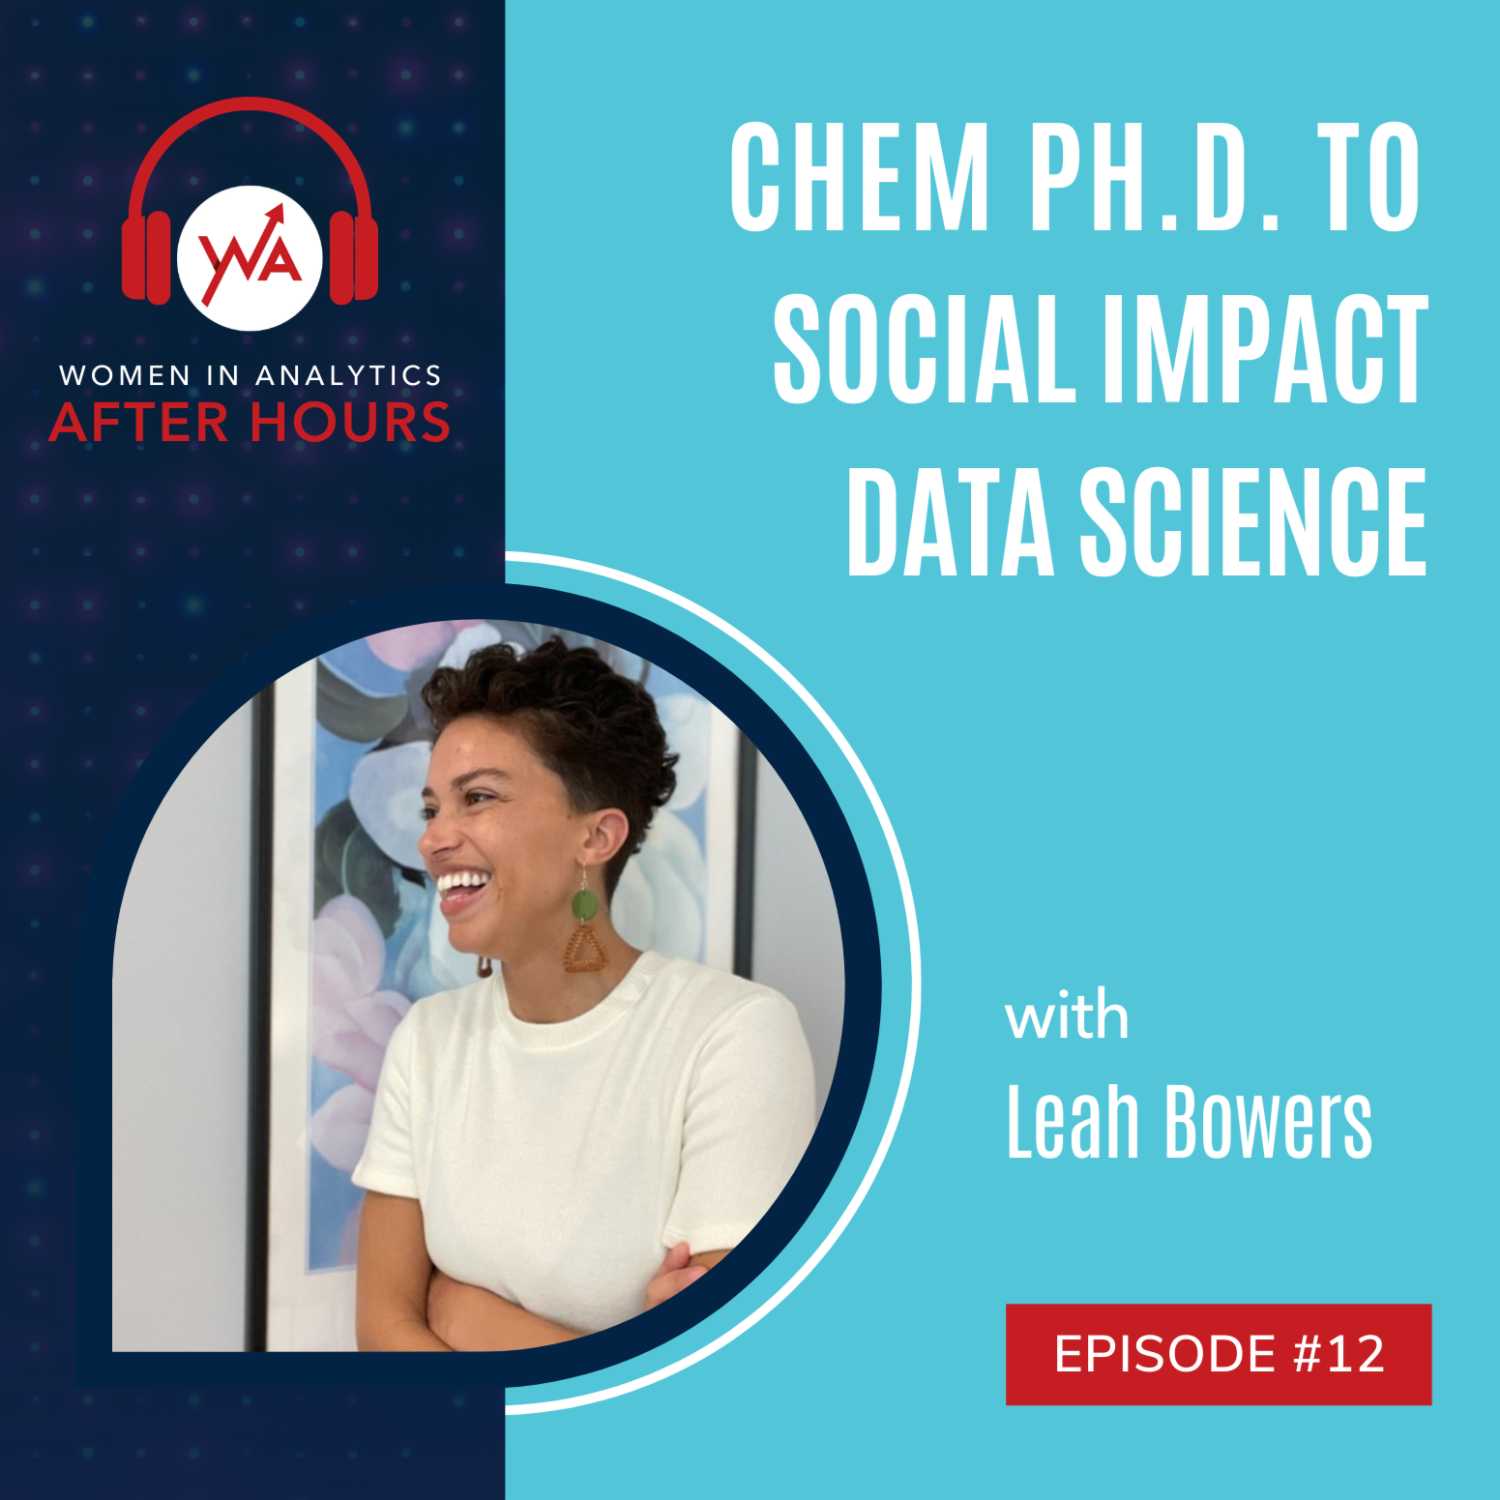 Episode 12: Chem Ph.D. to Social Impact Data Science with Leah Bowers